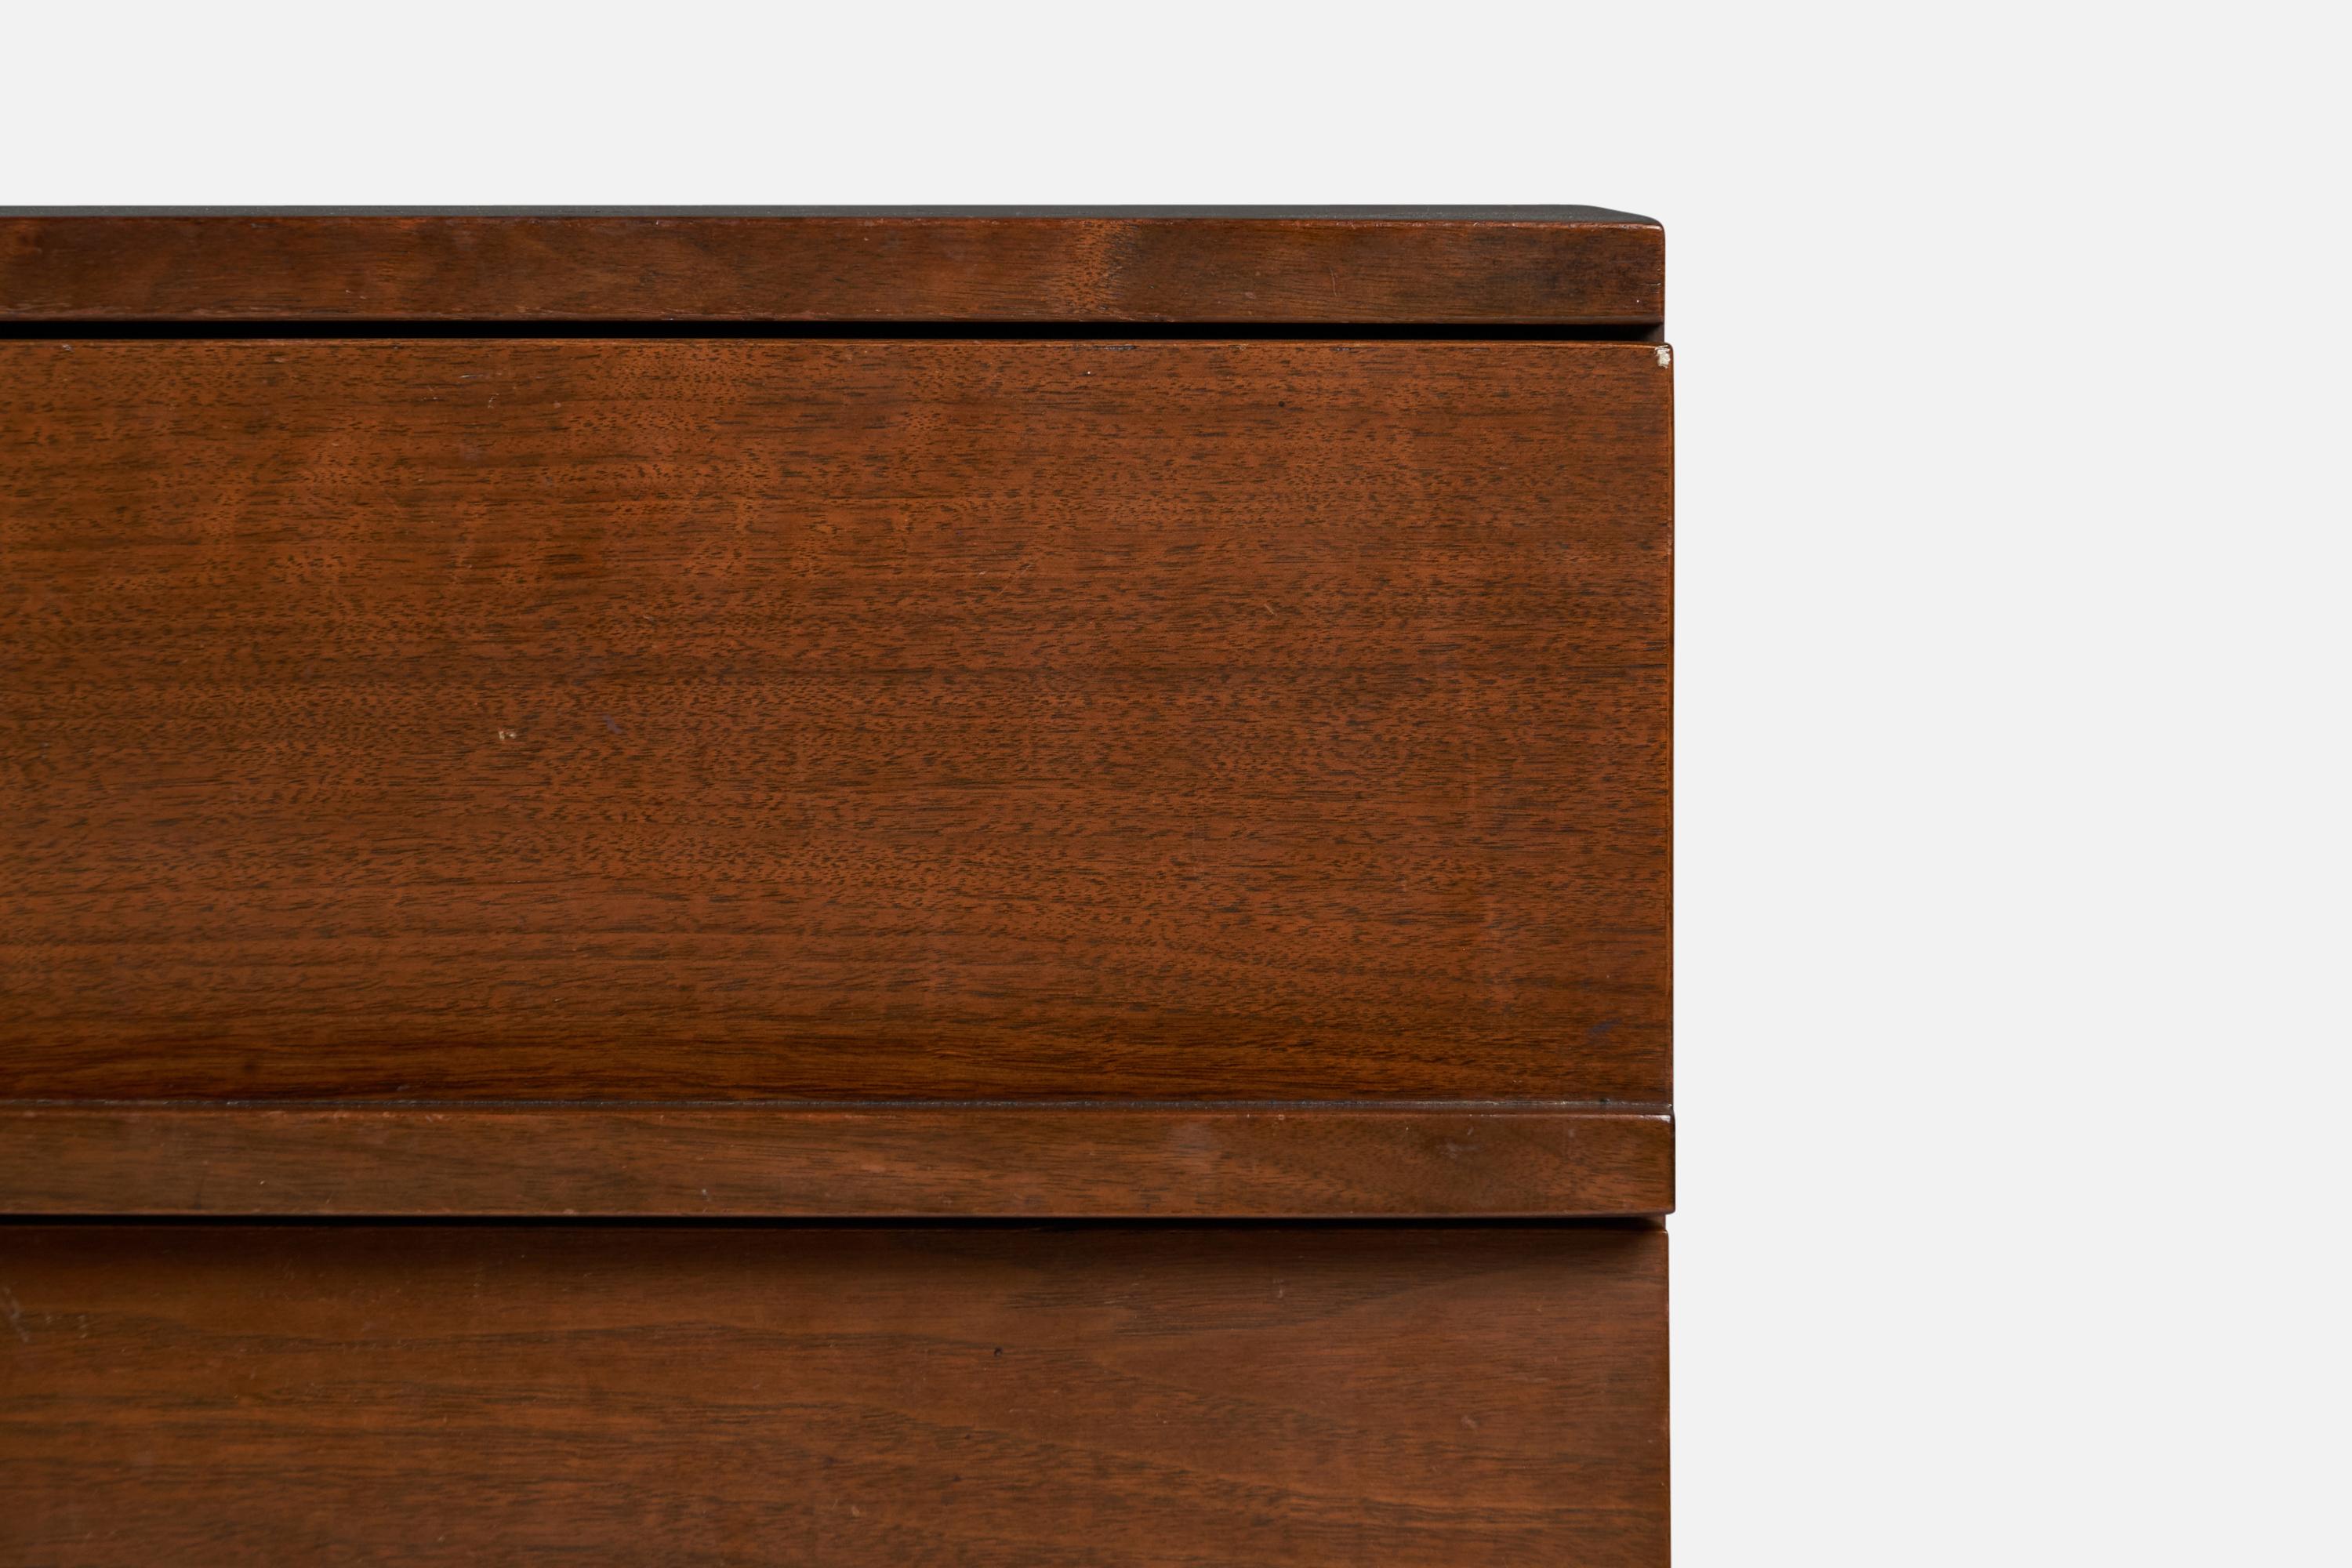 A walnut chest of drawers designed by Mel Smilow and produced by Smilow-Thielle, USA, 1950s.